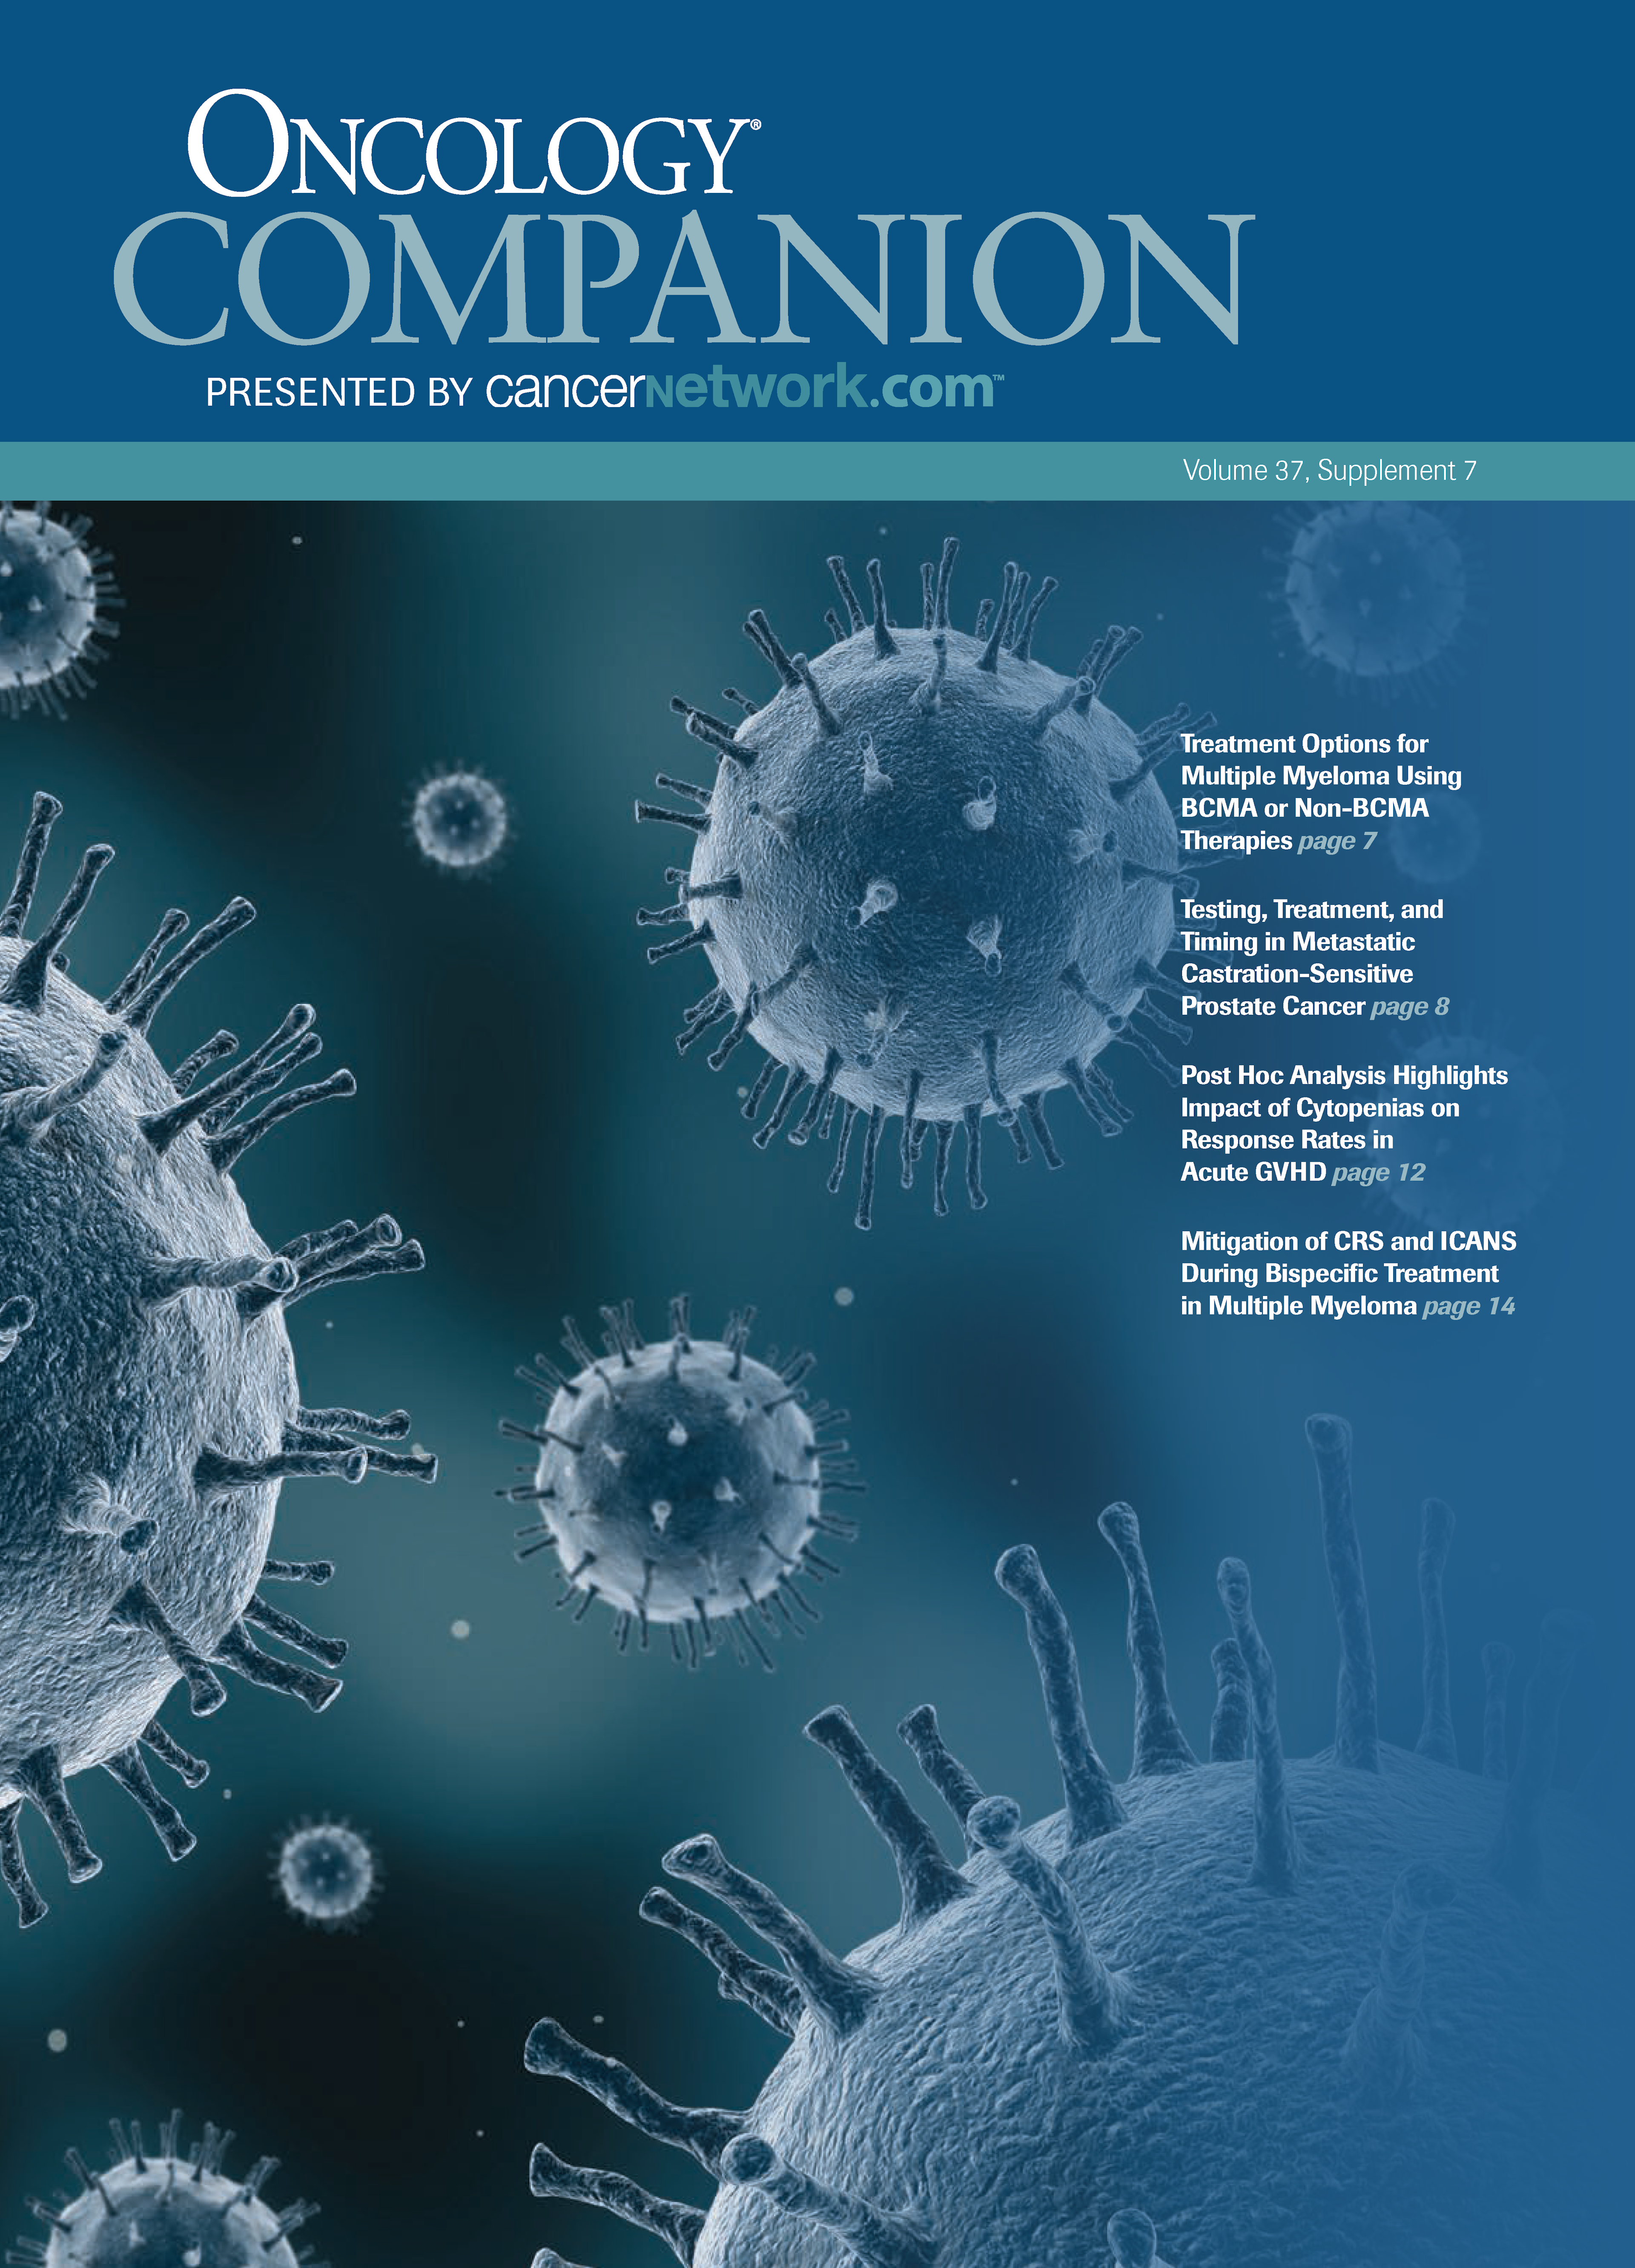 ONCOLOGY® Companion, Volume 37, Supplement 7